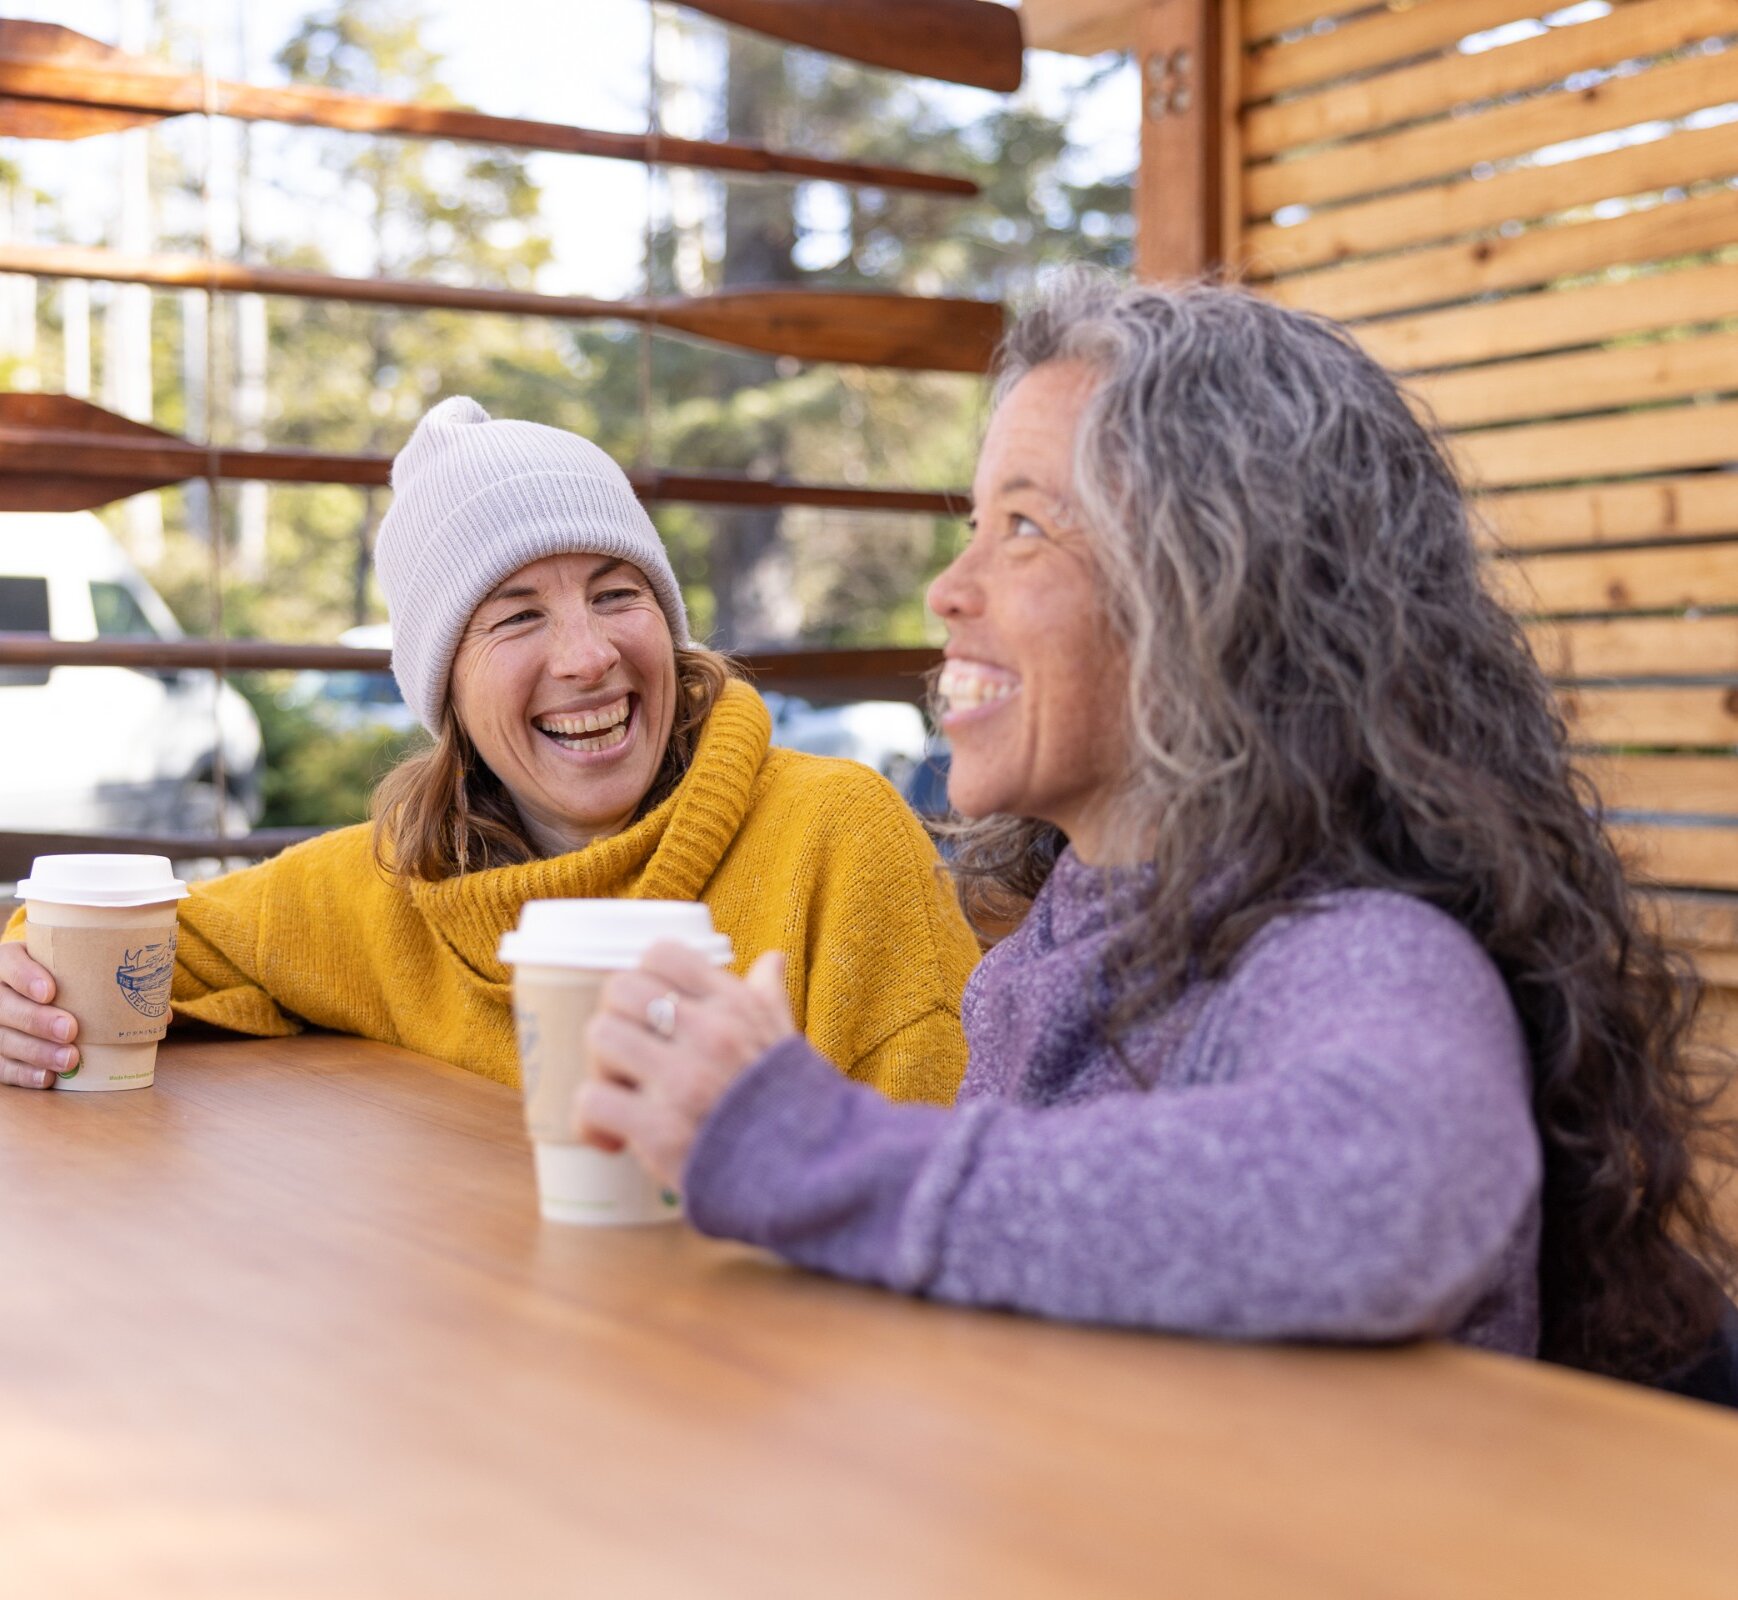 One caucasian woman and a mixed-race woman laughing and drinking at an outside cafe.